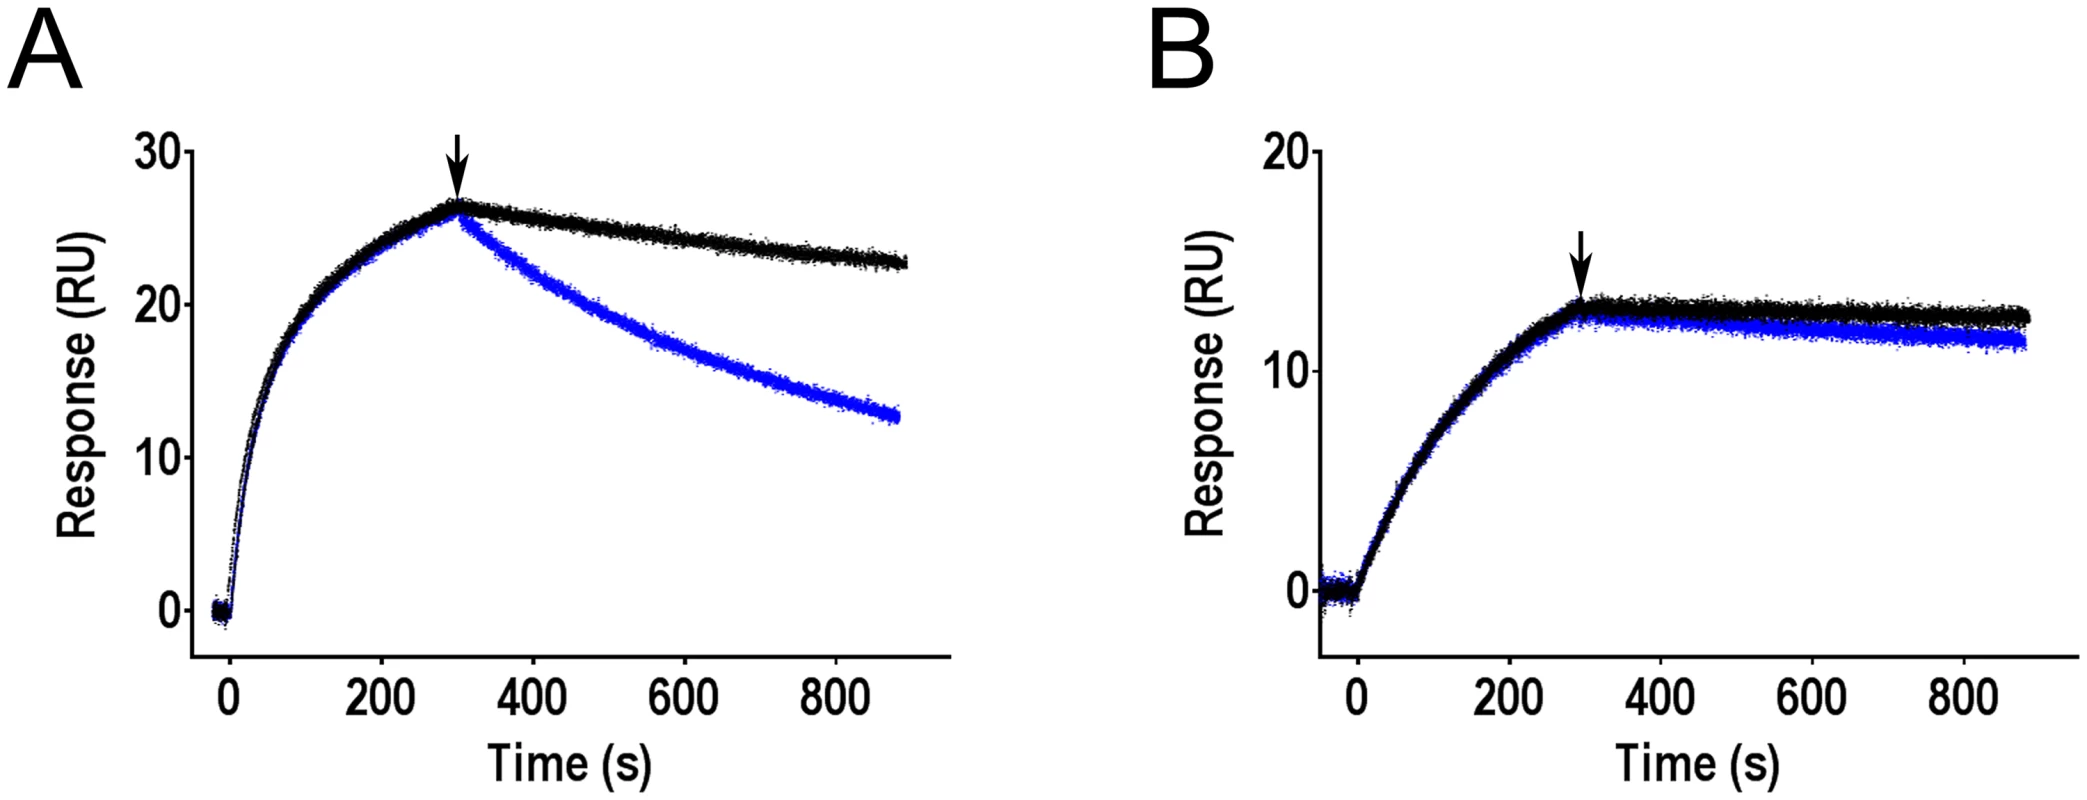 Effect of mannose on antibodies bound to FimH as determined by surface plasmon resonance.